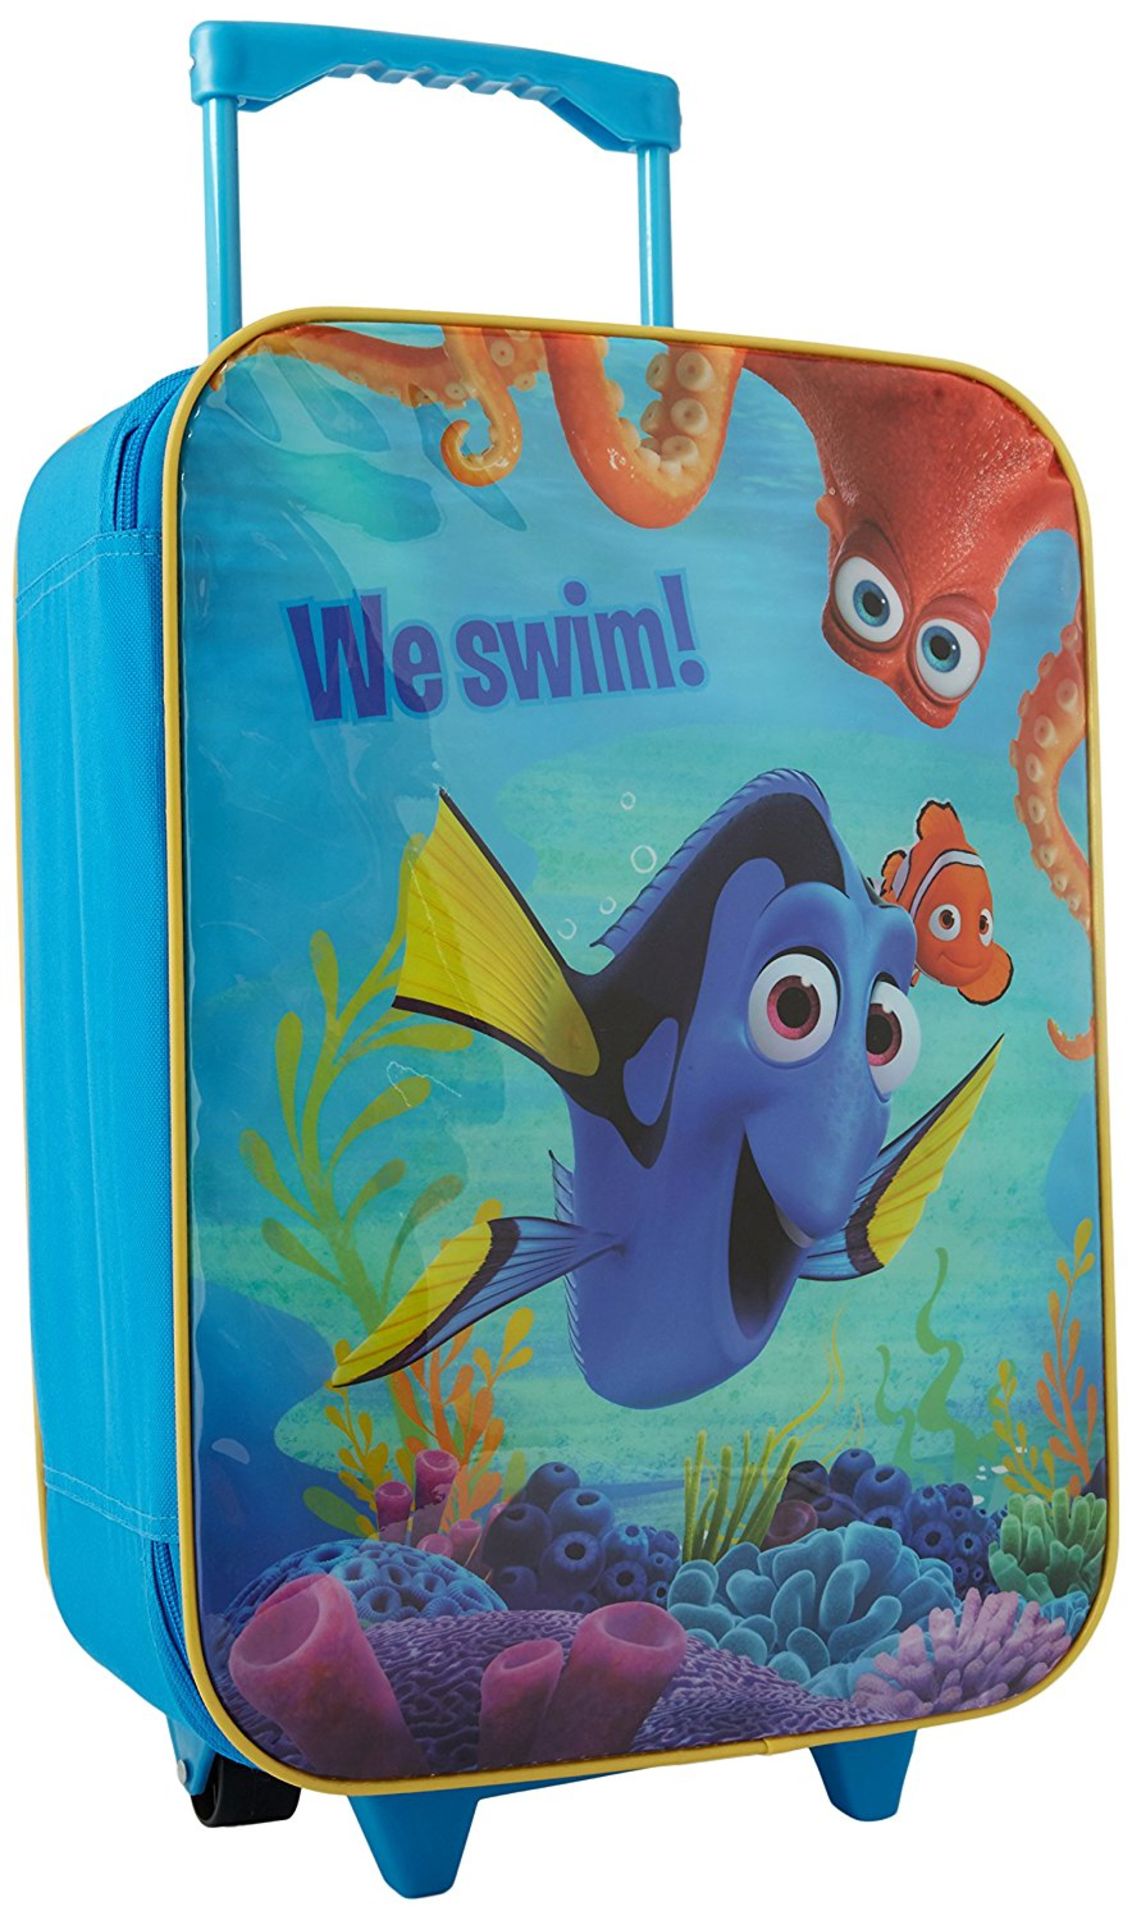 72 X Disney Finding Dory 3Pce Travel Trolley Luggage Set [Brand New In Retail Packaging]